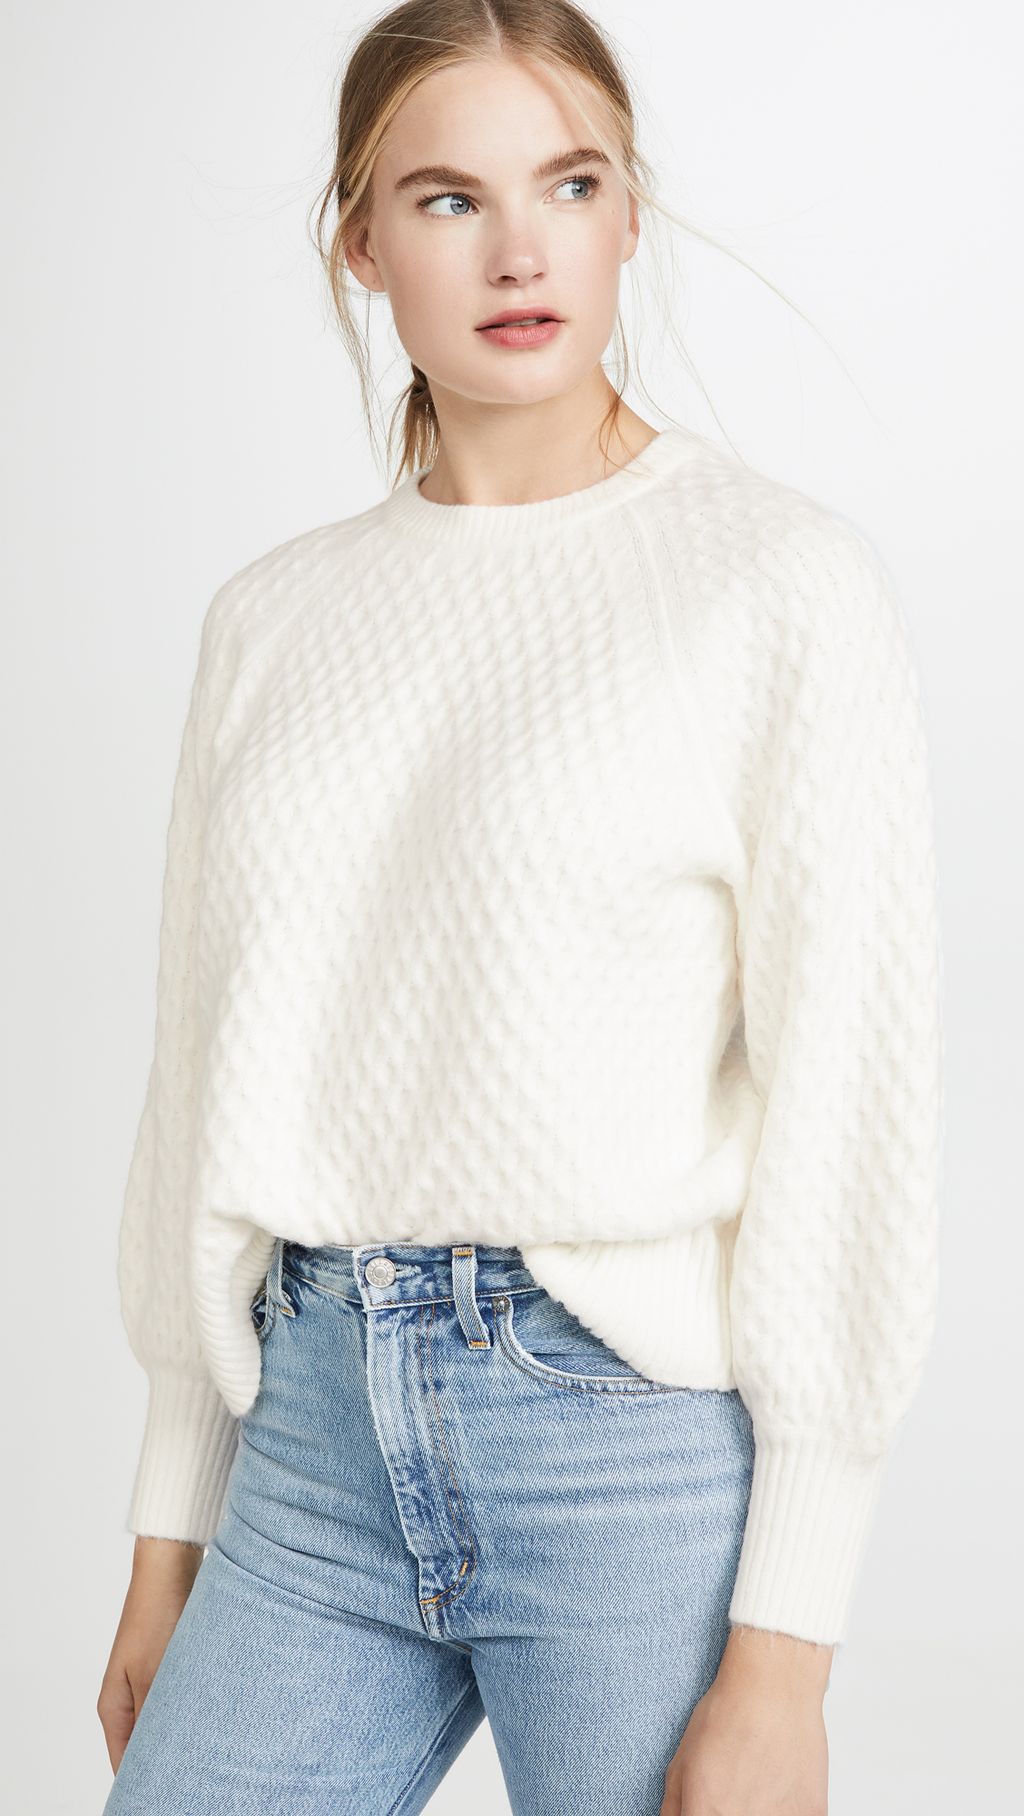 Shop the Best Affordable Puffed-Sleeve Sweaters | Who What Wear